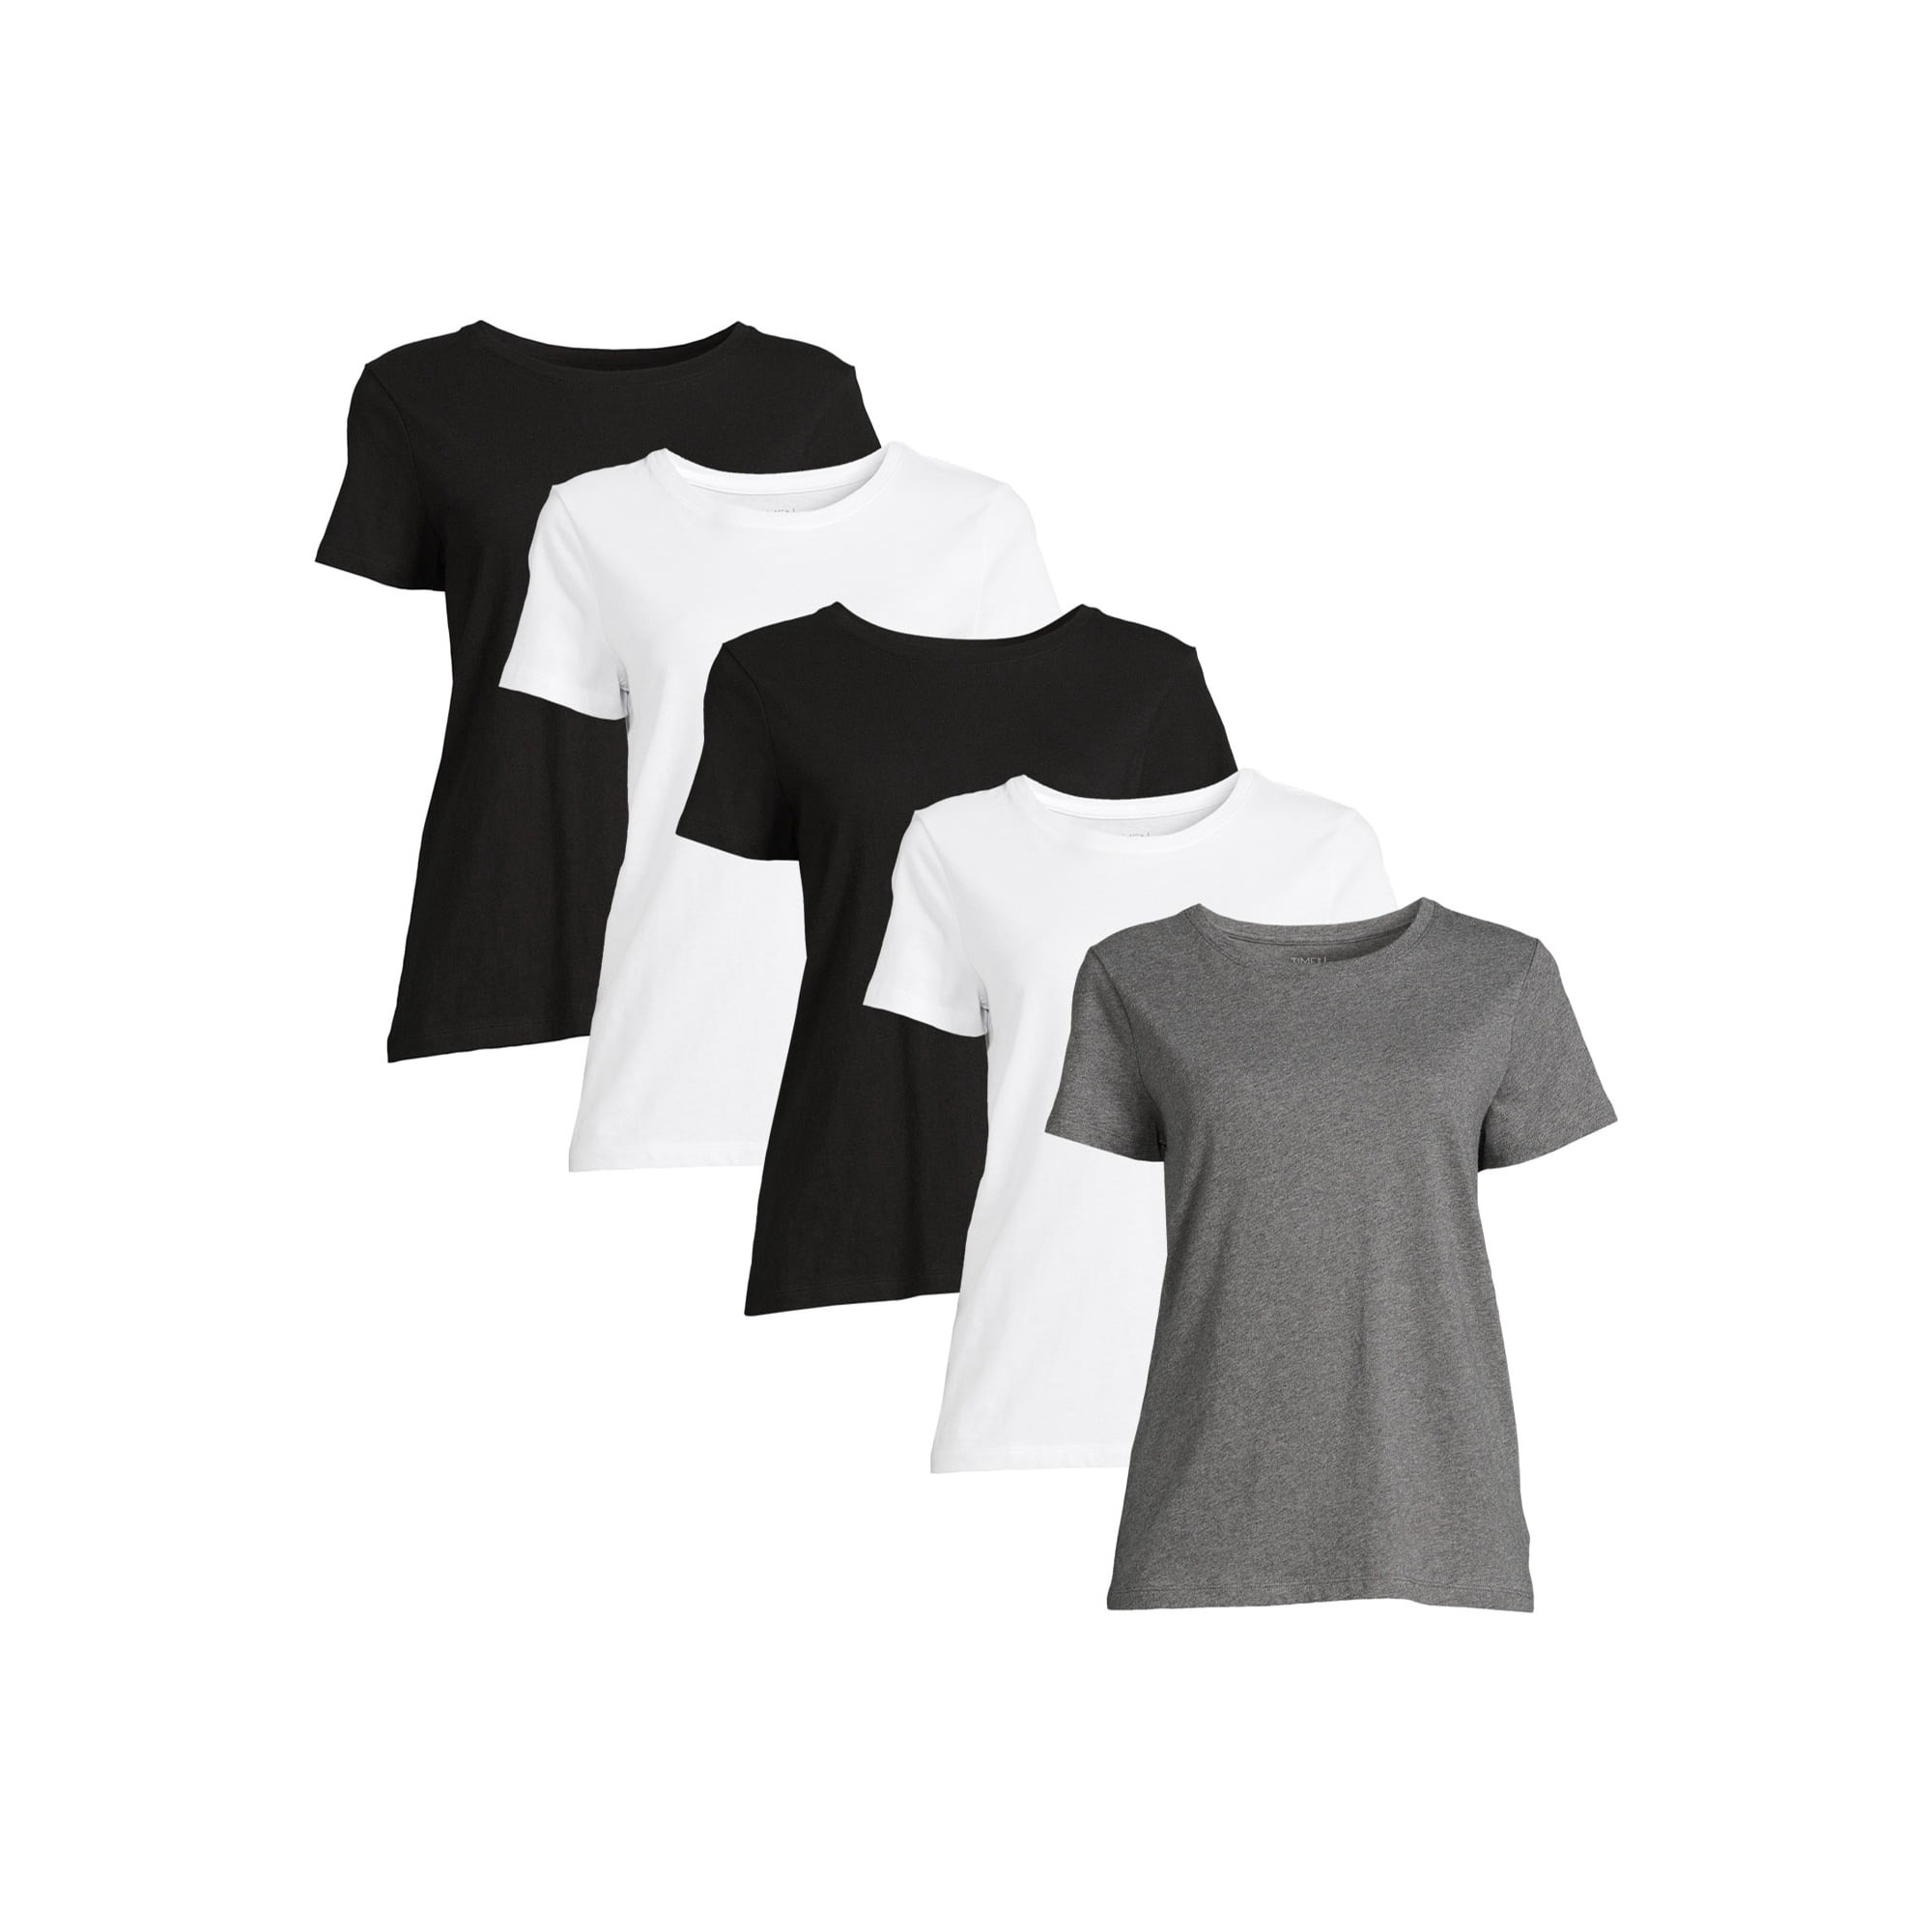 Time and Tru Women's Short Sleeve Crew Tee (5 Pack) - image 1 of 5